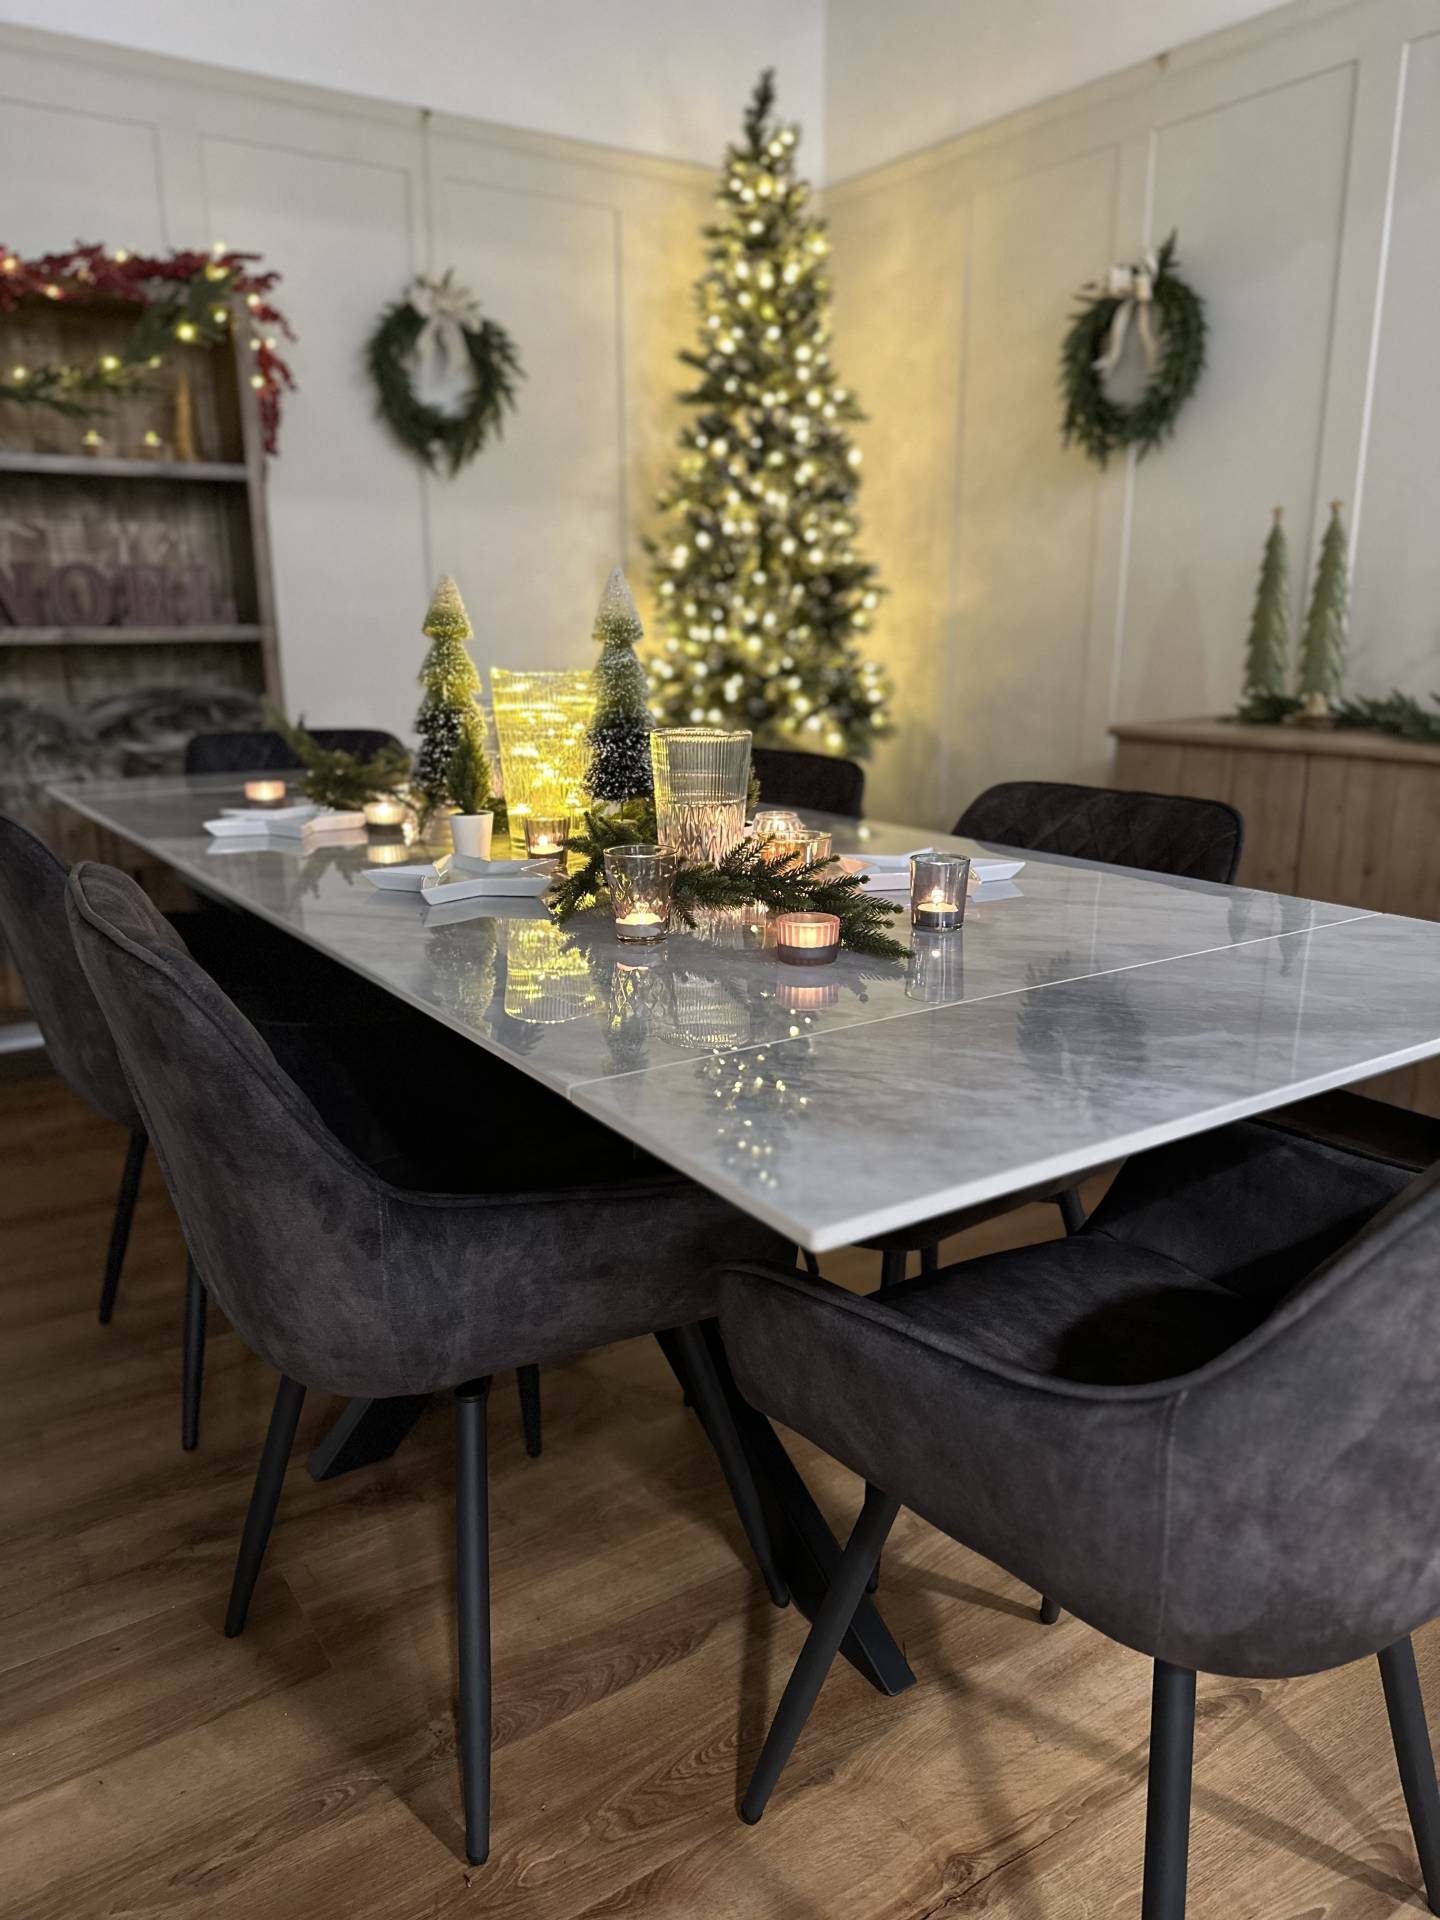 Stone Dining Table & Chairs Set for Christmas